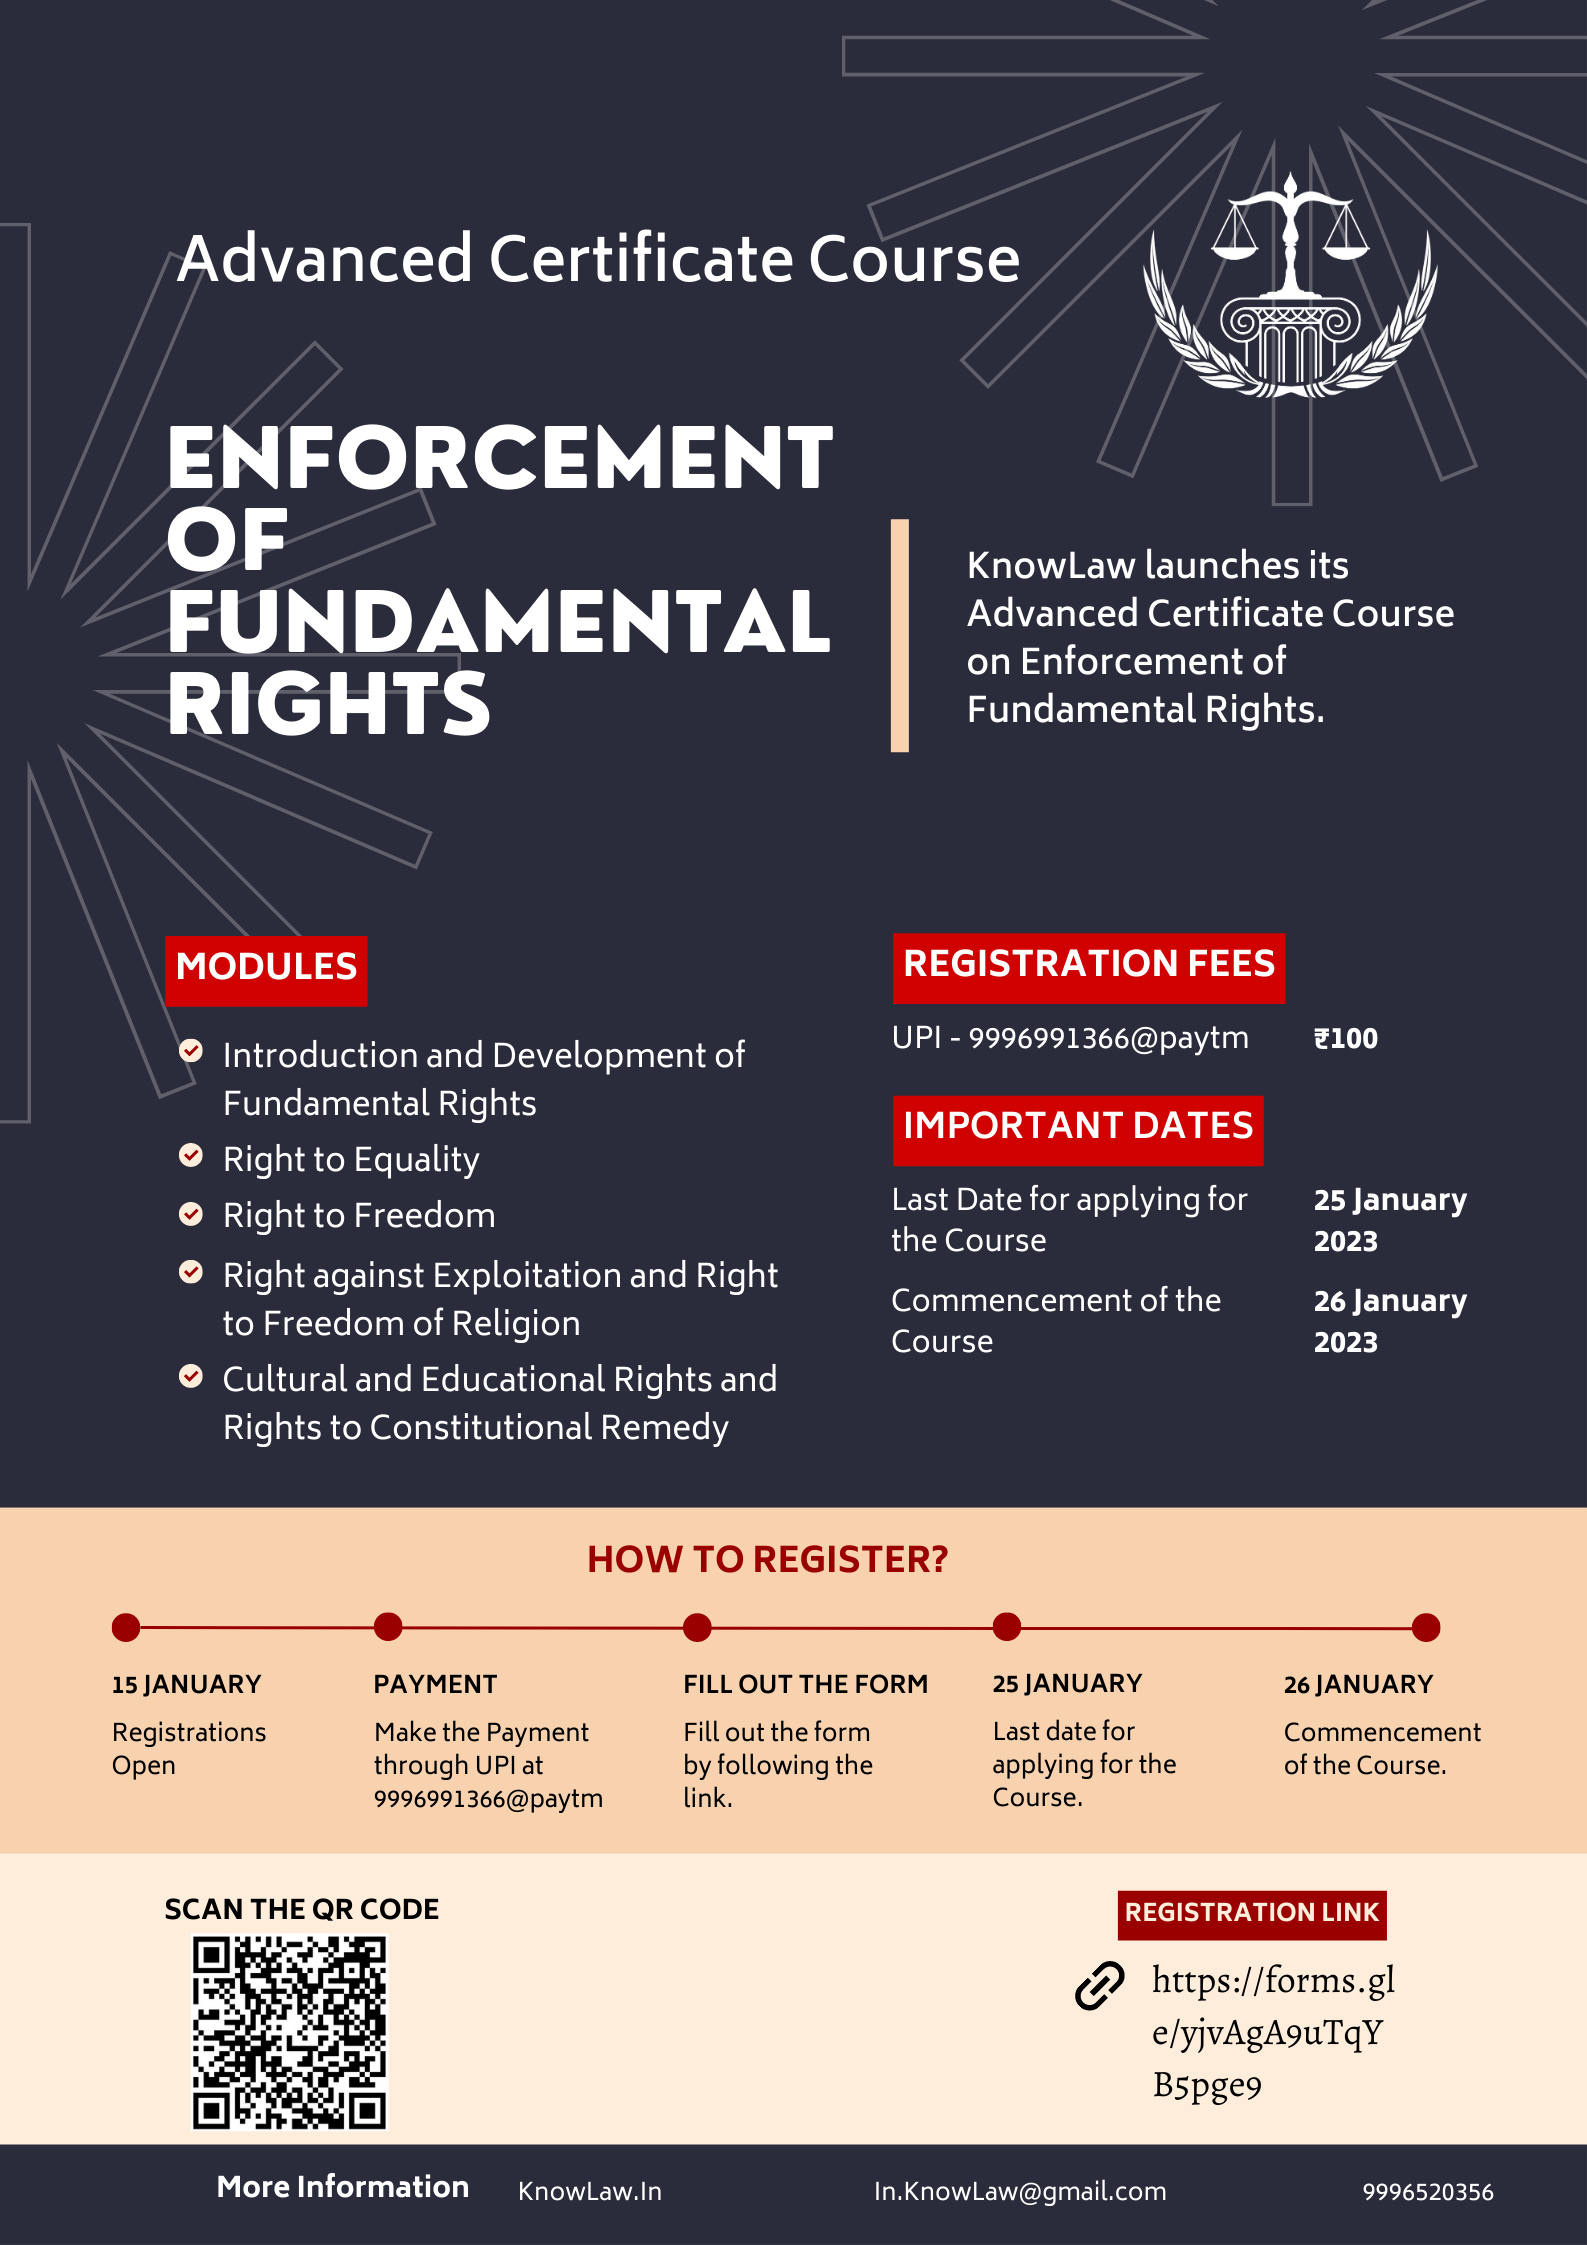 Advanced Certificate Course on Enforcement of Fundamental Rights